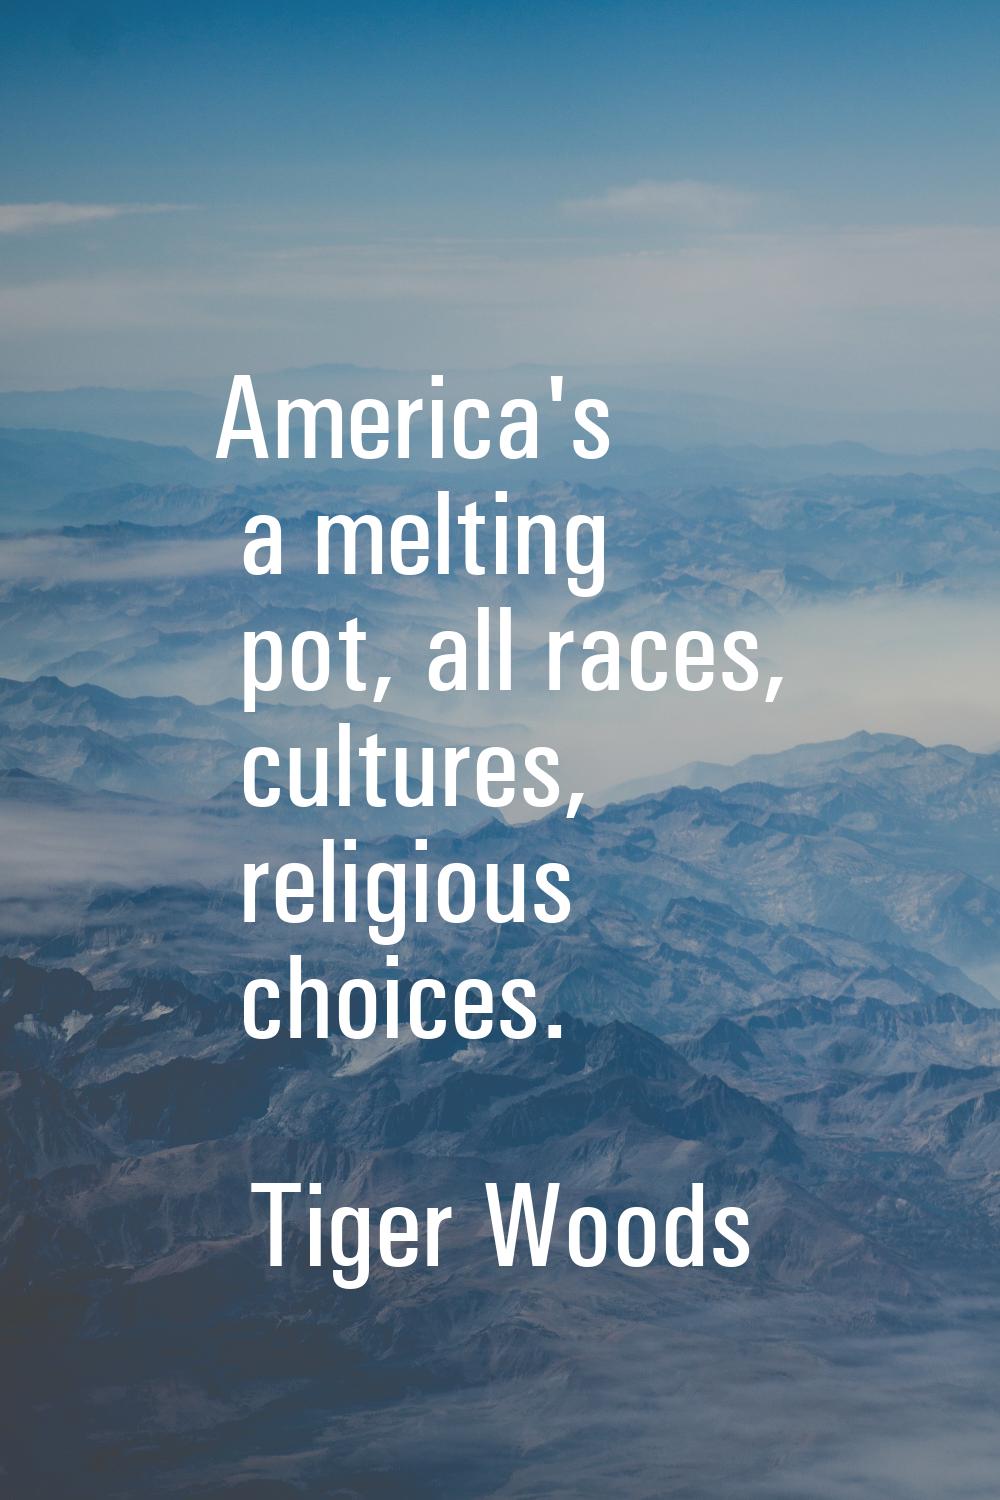 America's a melting pot, all races, cultures, religious choices.